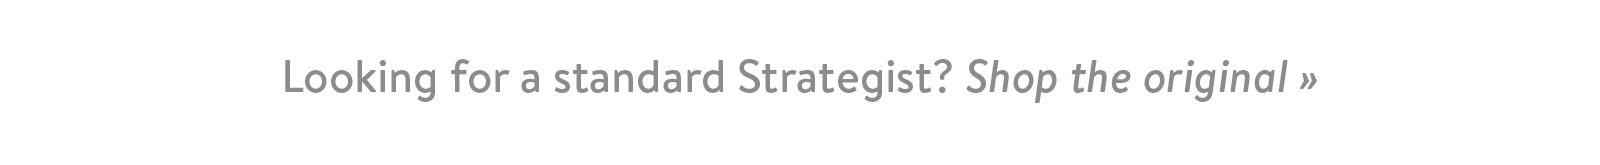 Looking for a standard Strategist? Shop the original ?